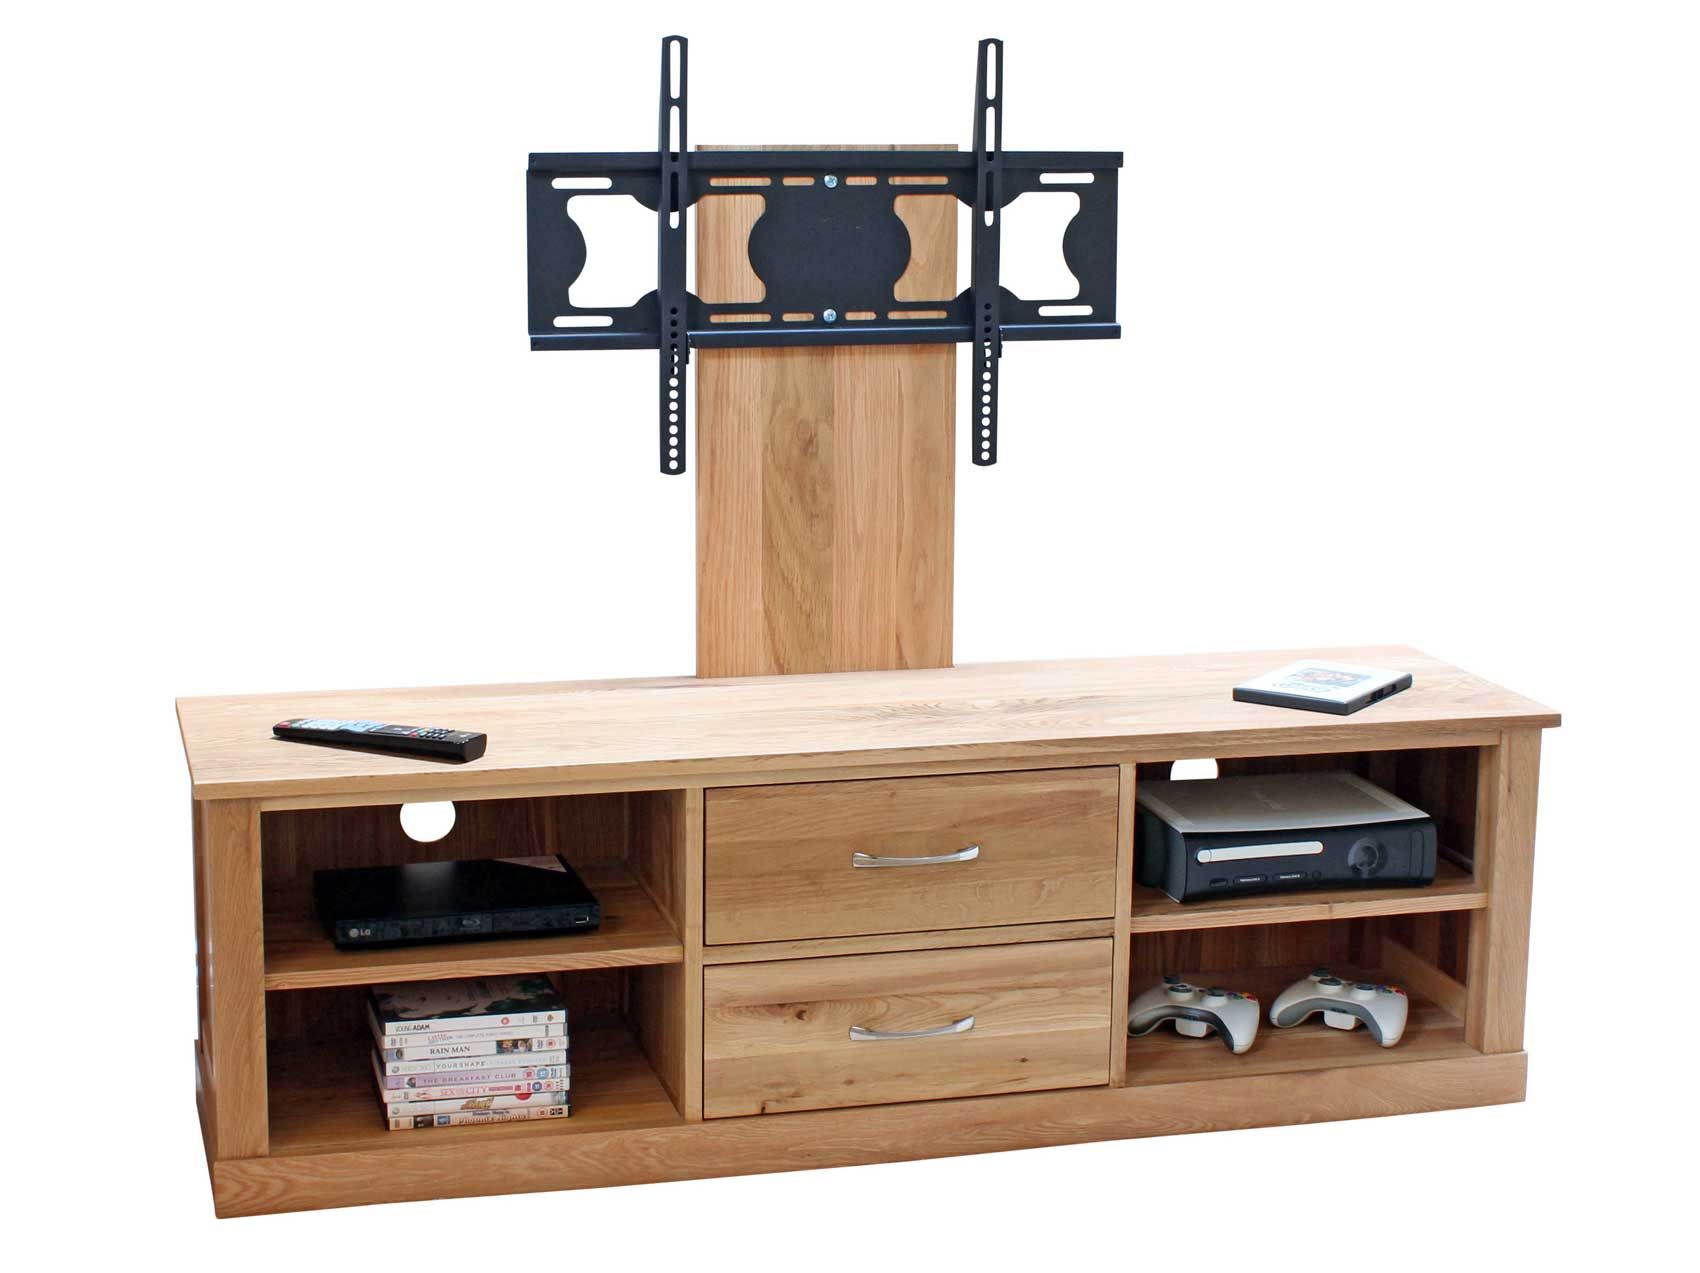 Cool Flat Screen Tv Stands With Mount – Homesfeed Inside Modern Tv Cabinets For Flat Screens (View 7 of 15)